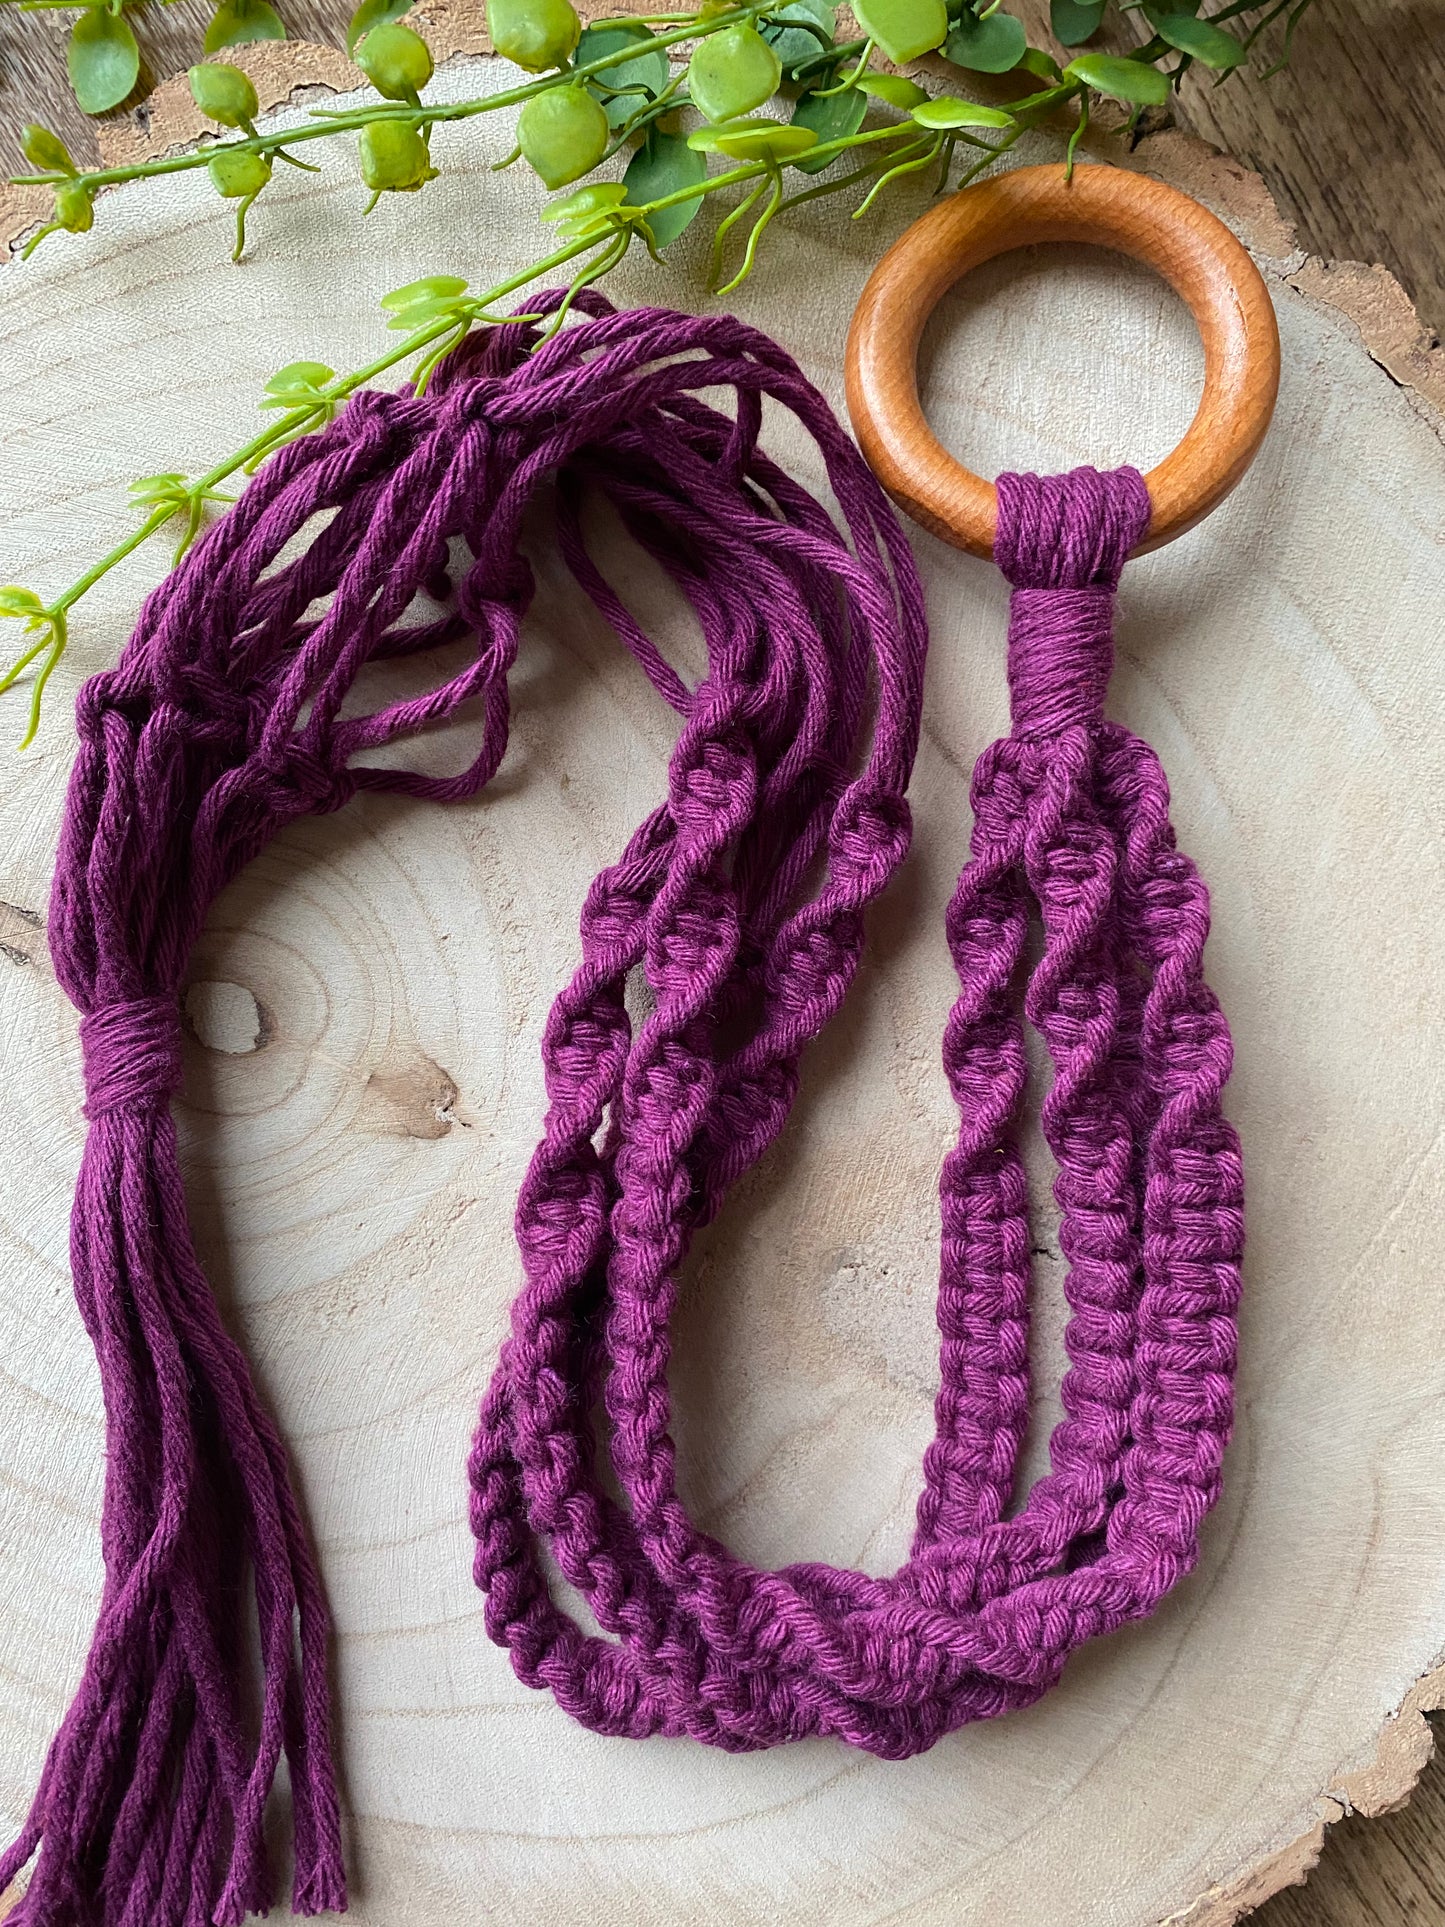 Macra-Made With Love short colourful macrame plant hanger purple flat